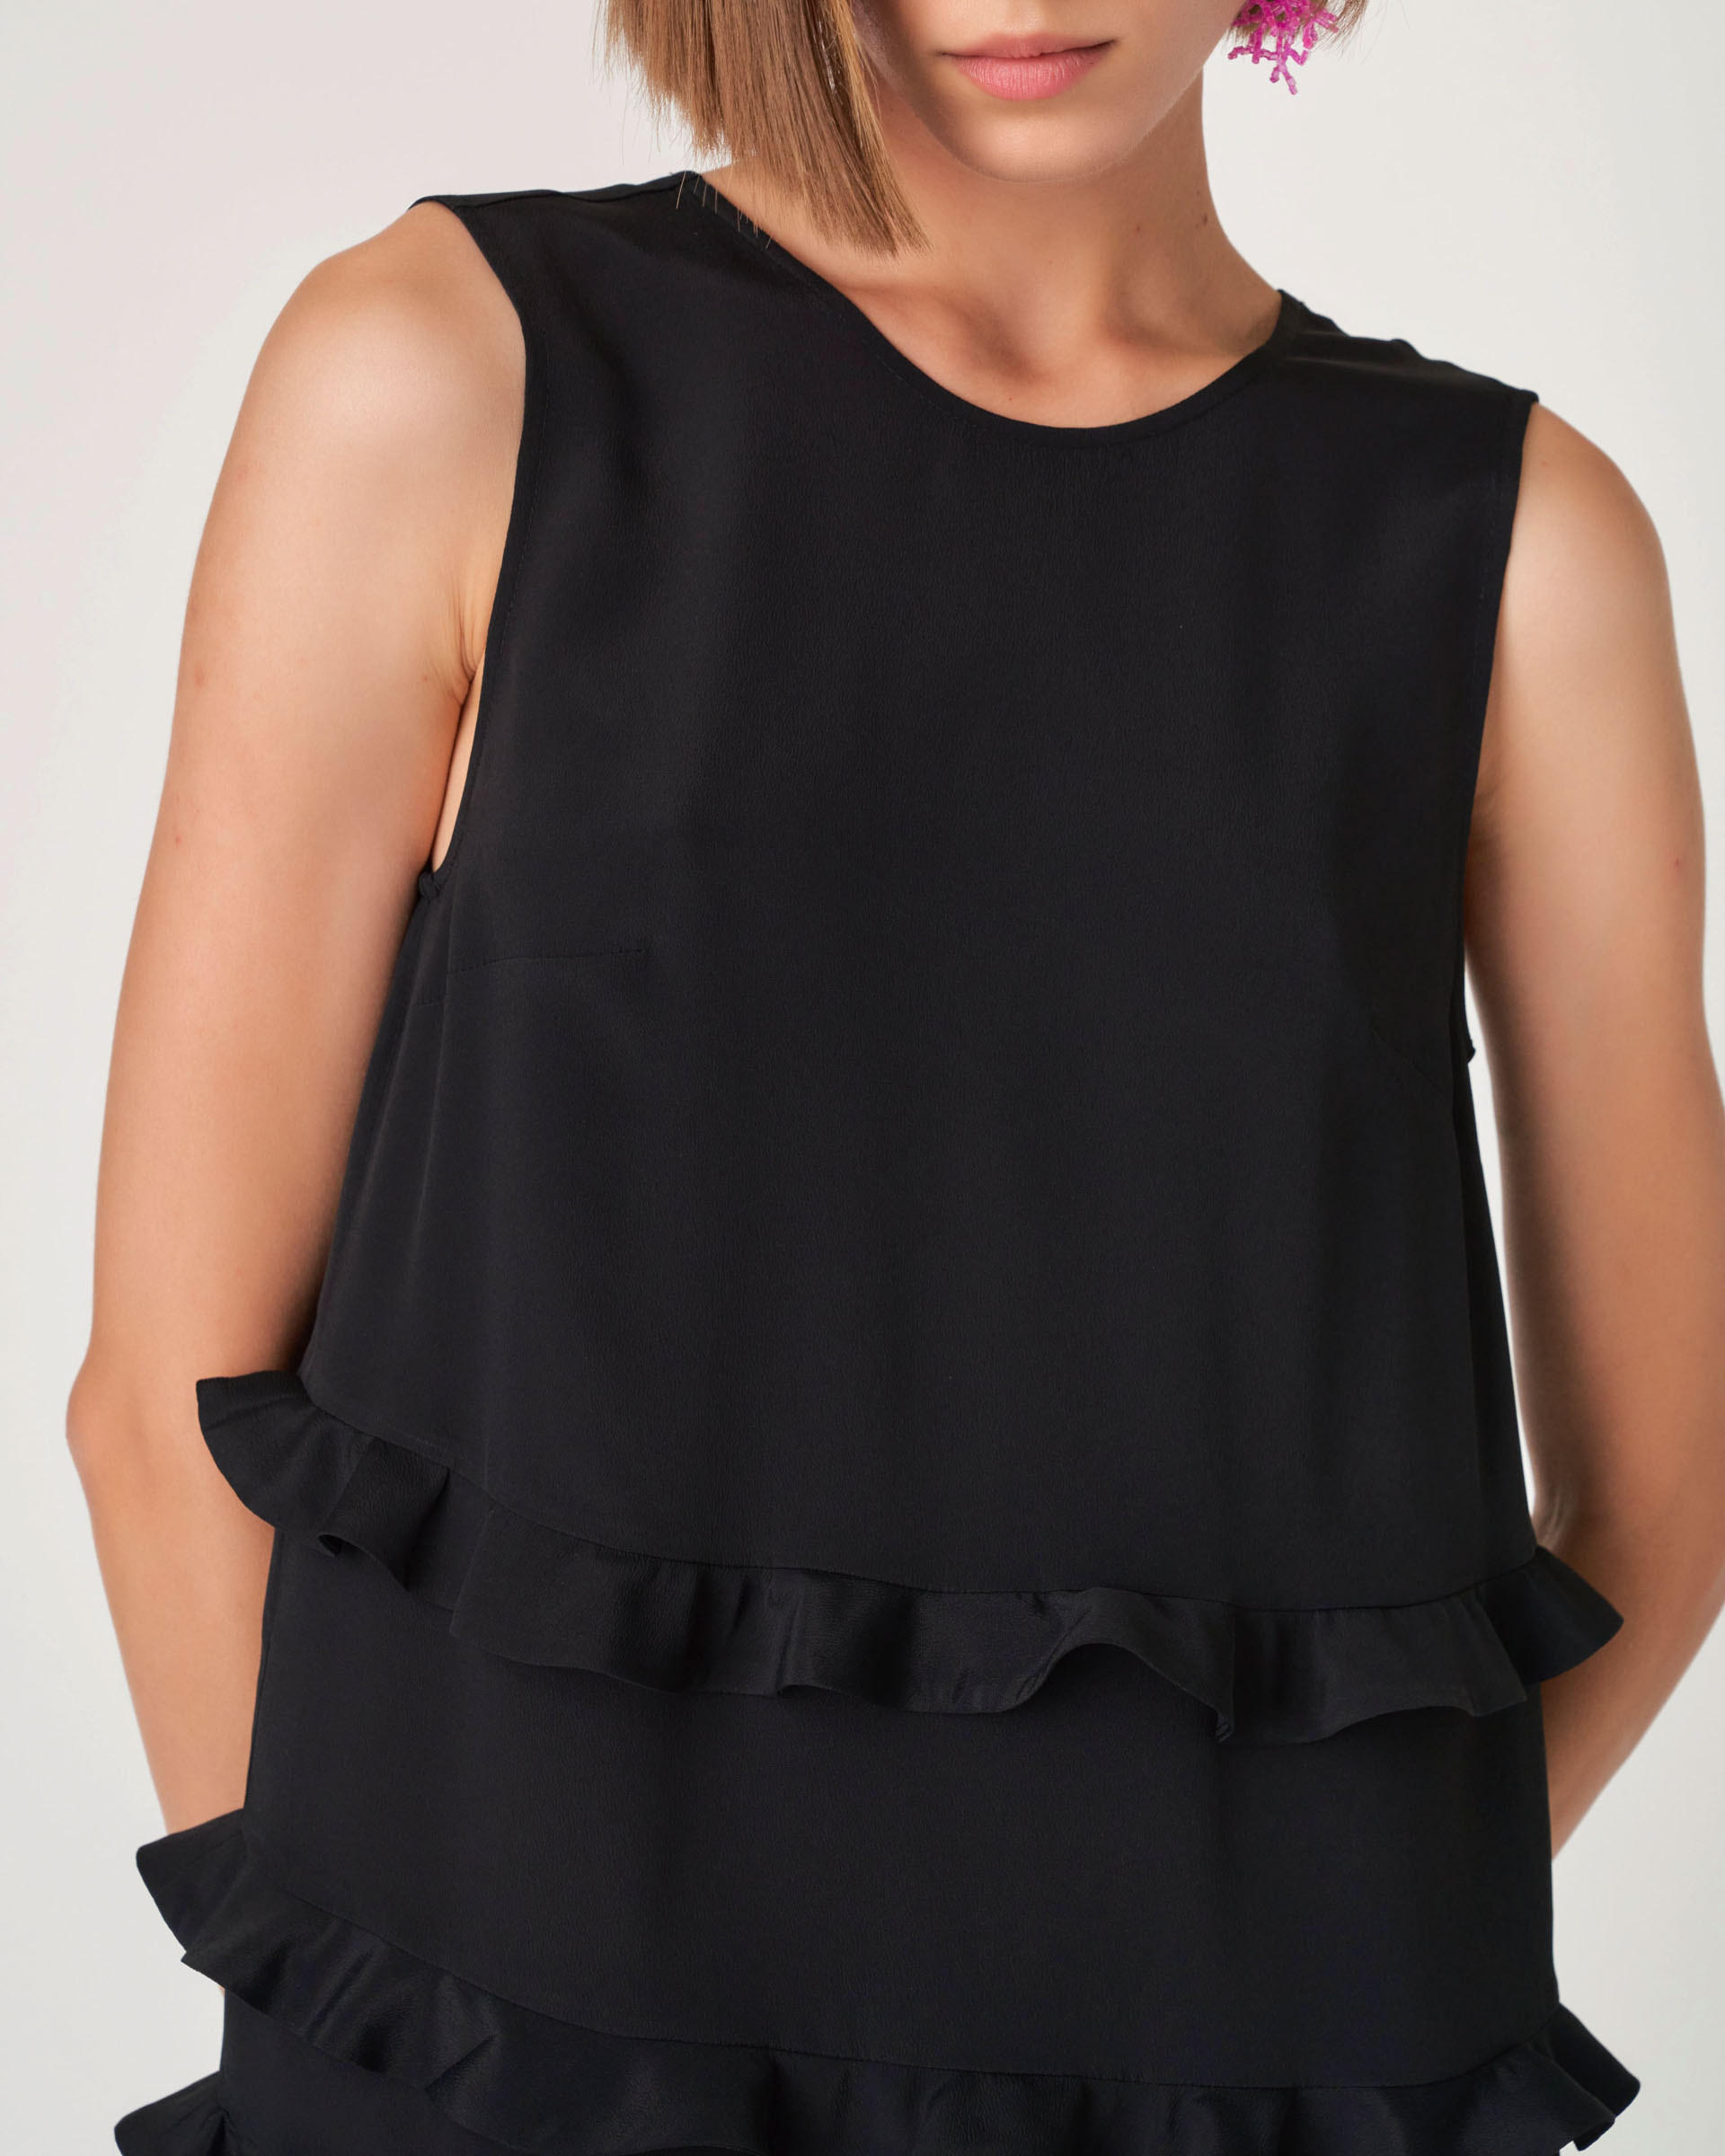 The Market Store | Little Black Dress With Ruffles